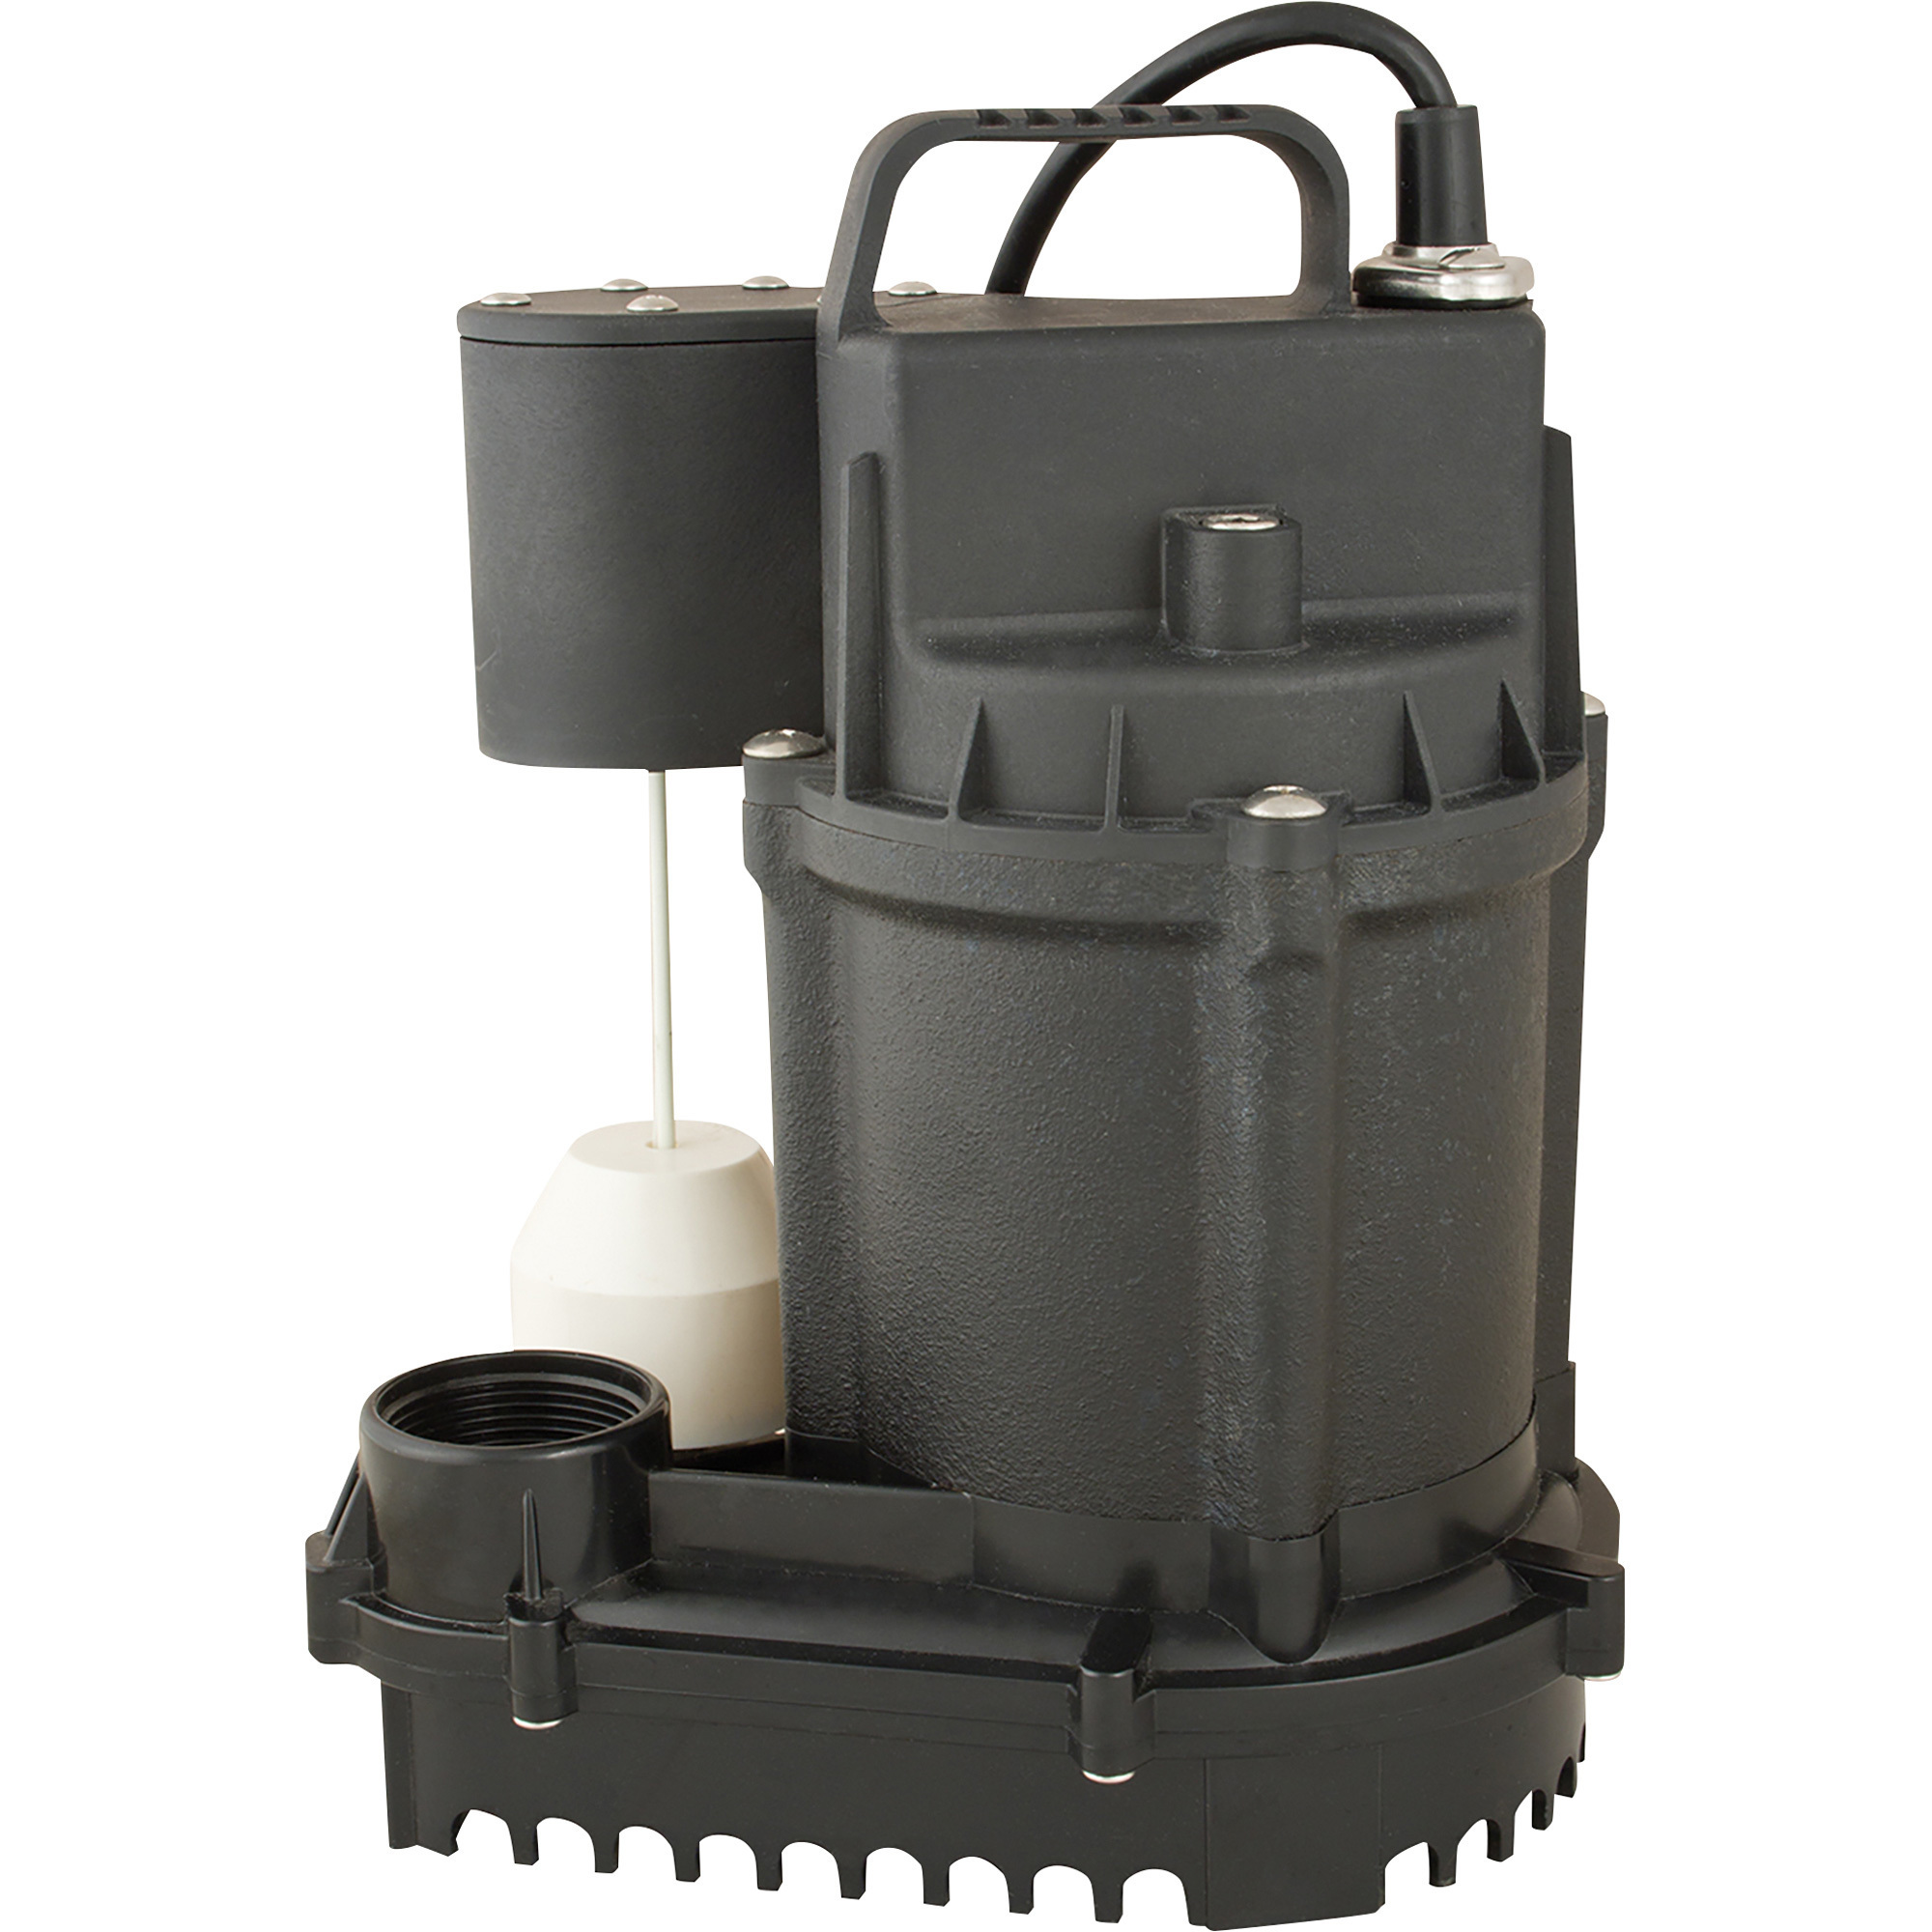 Star Water Systems Cast Iron Sump Pump â 3400 GPH, 1/2 HP, 1 1/2Inch Port, Model 5SEH